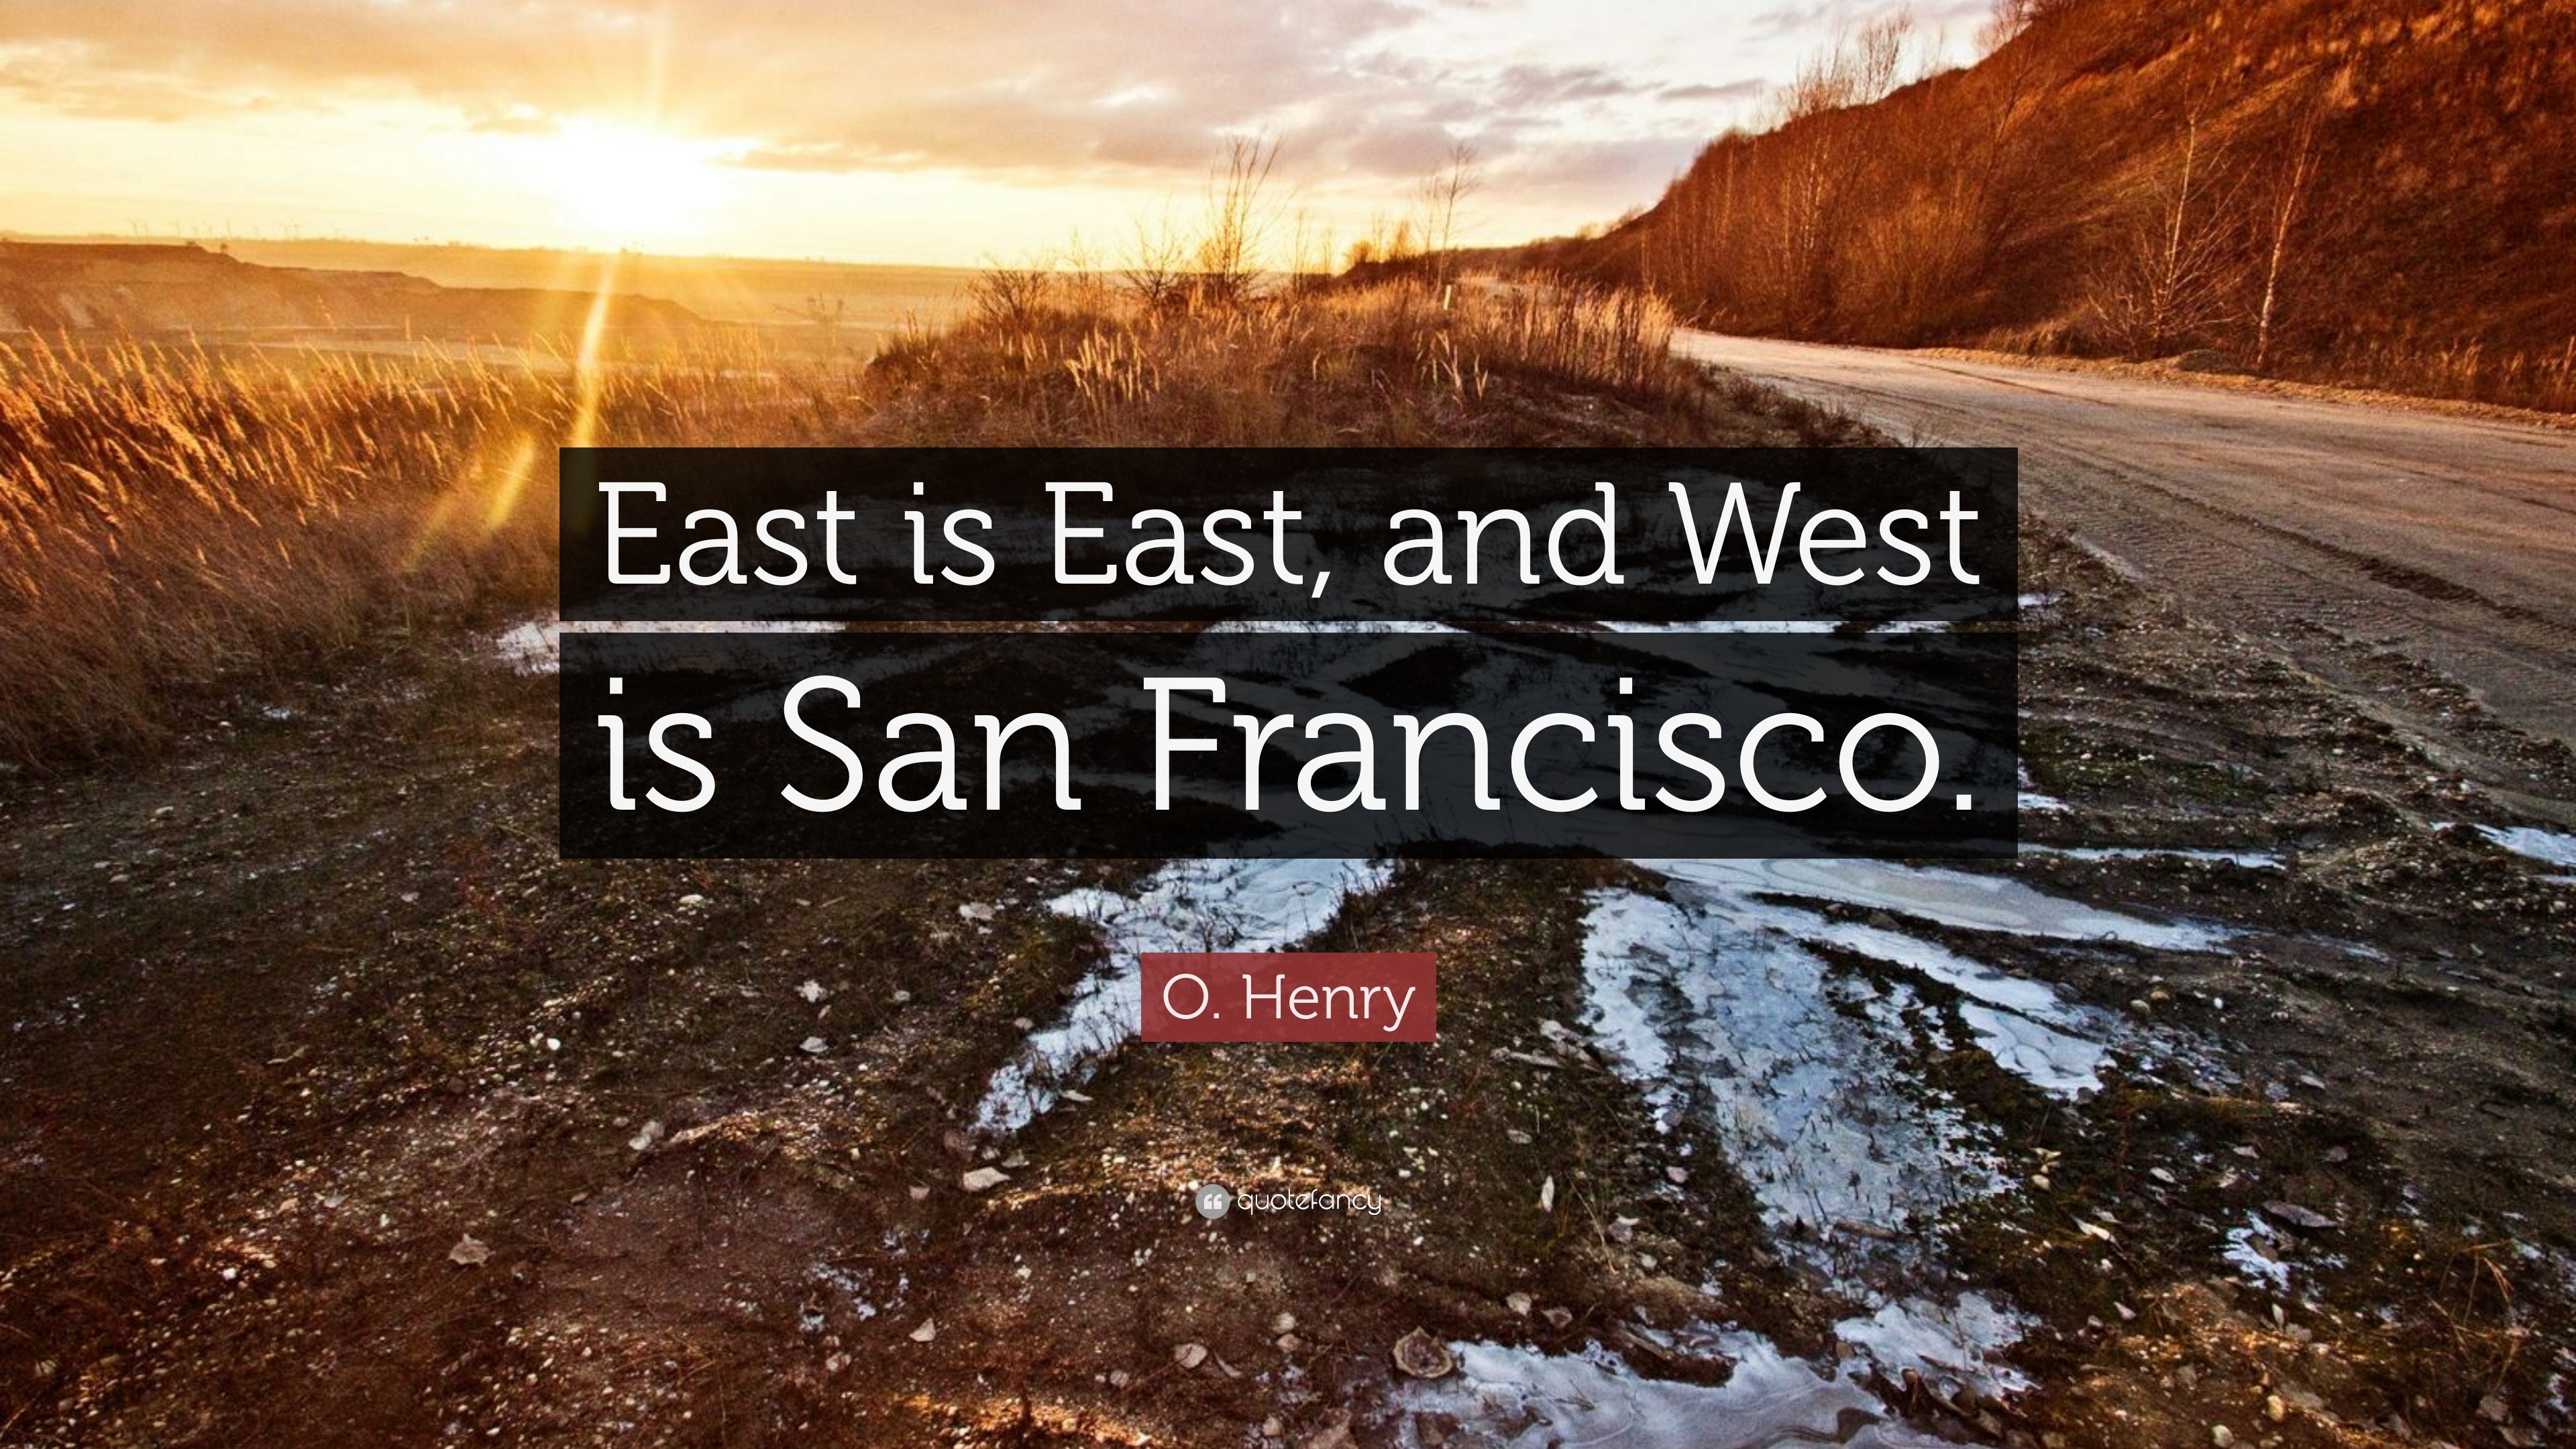 O. Henry Quote: "East is East, and West is San Francisco."